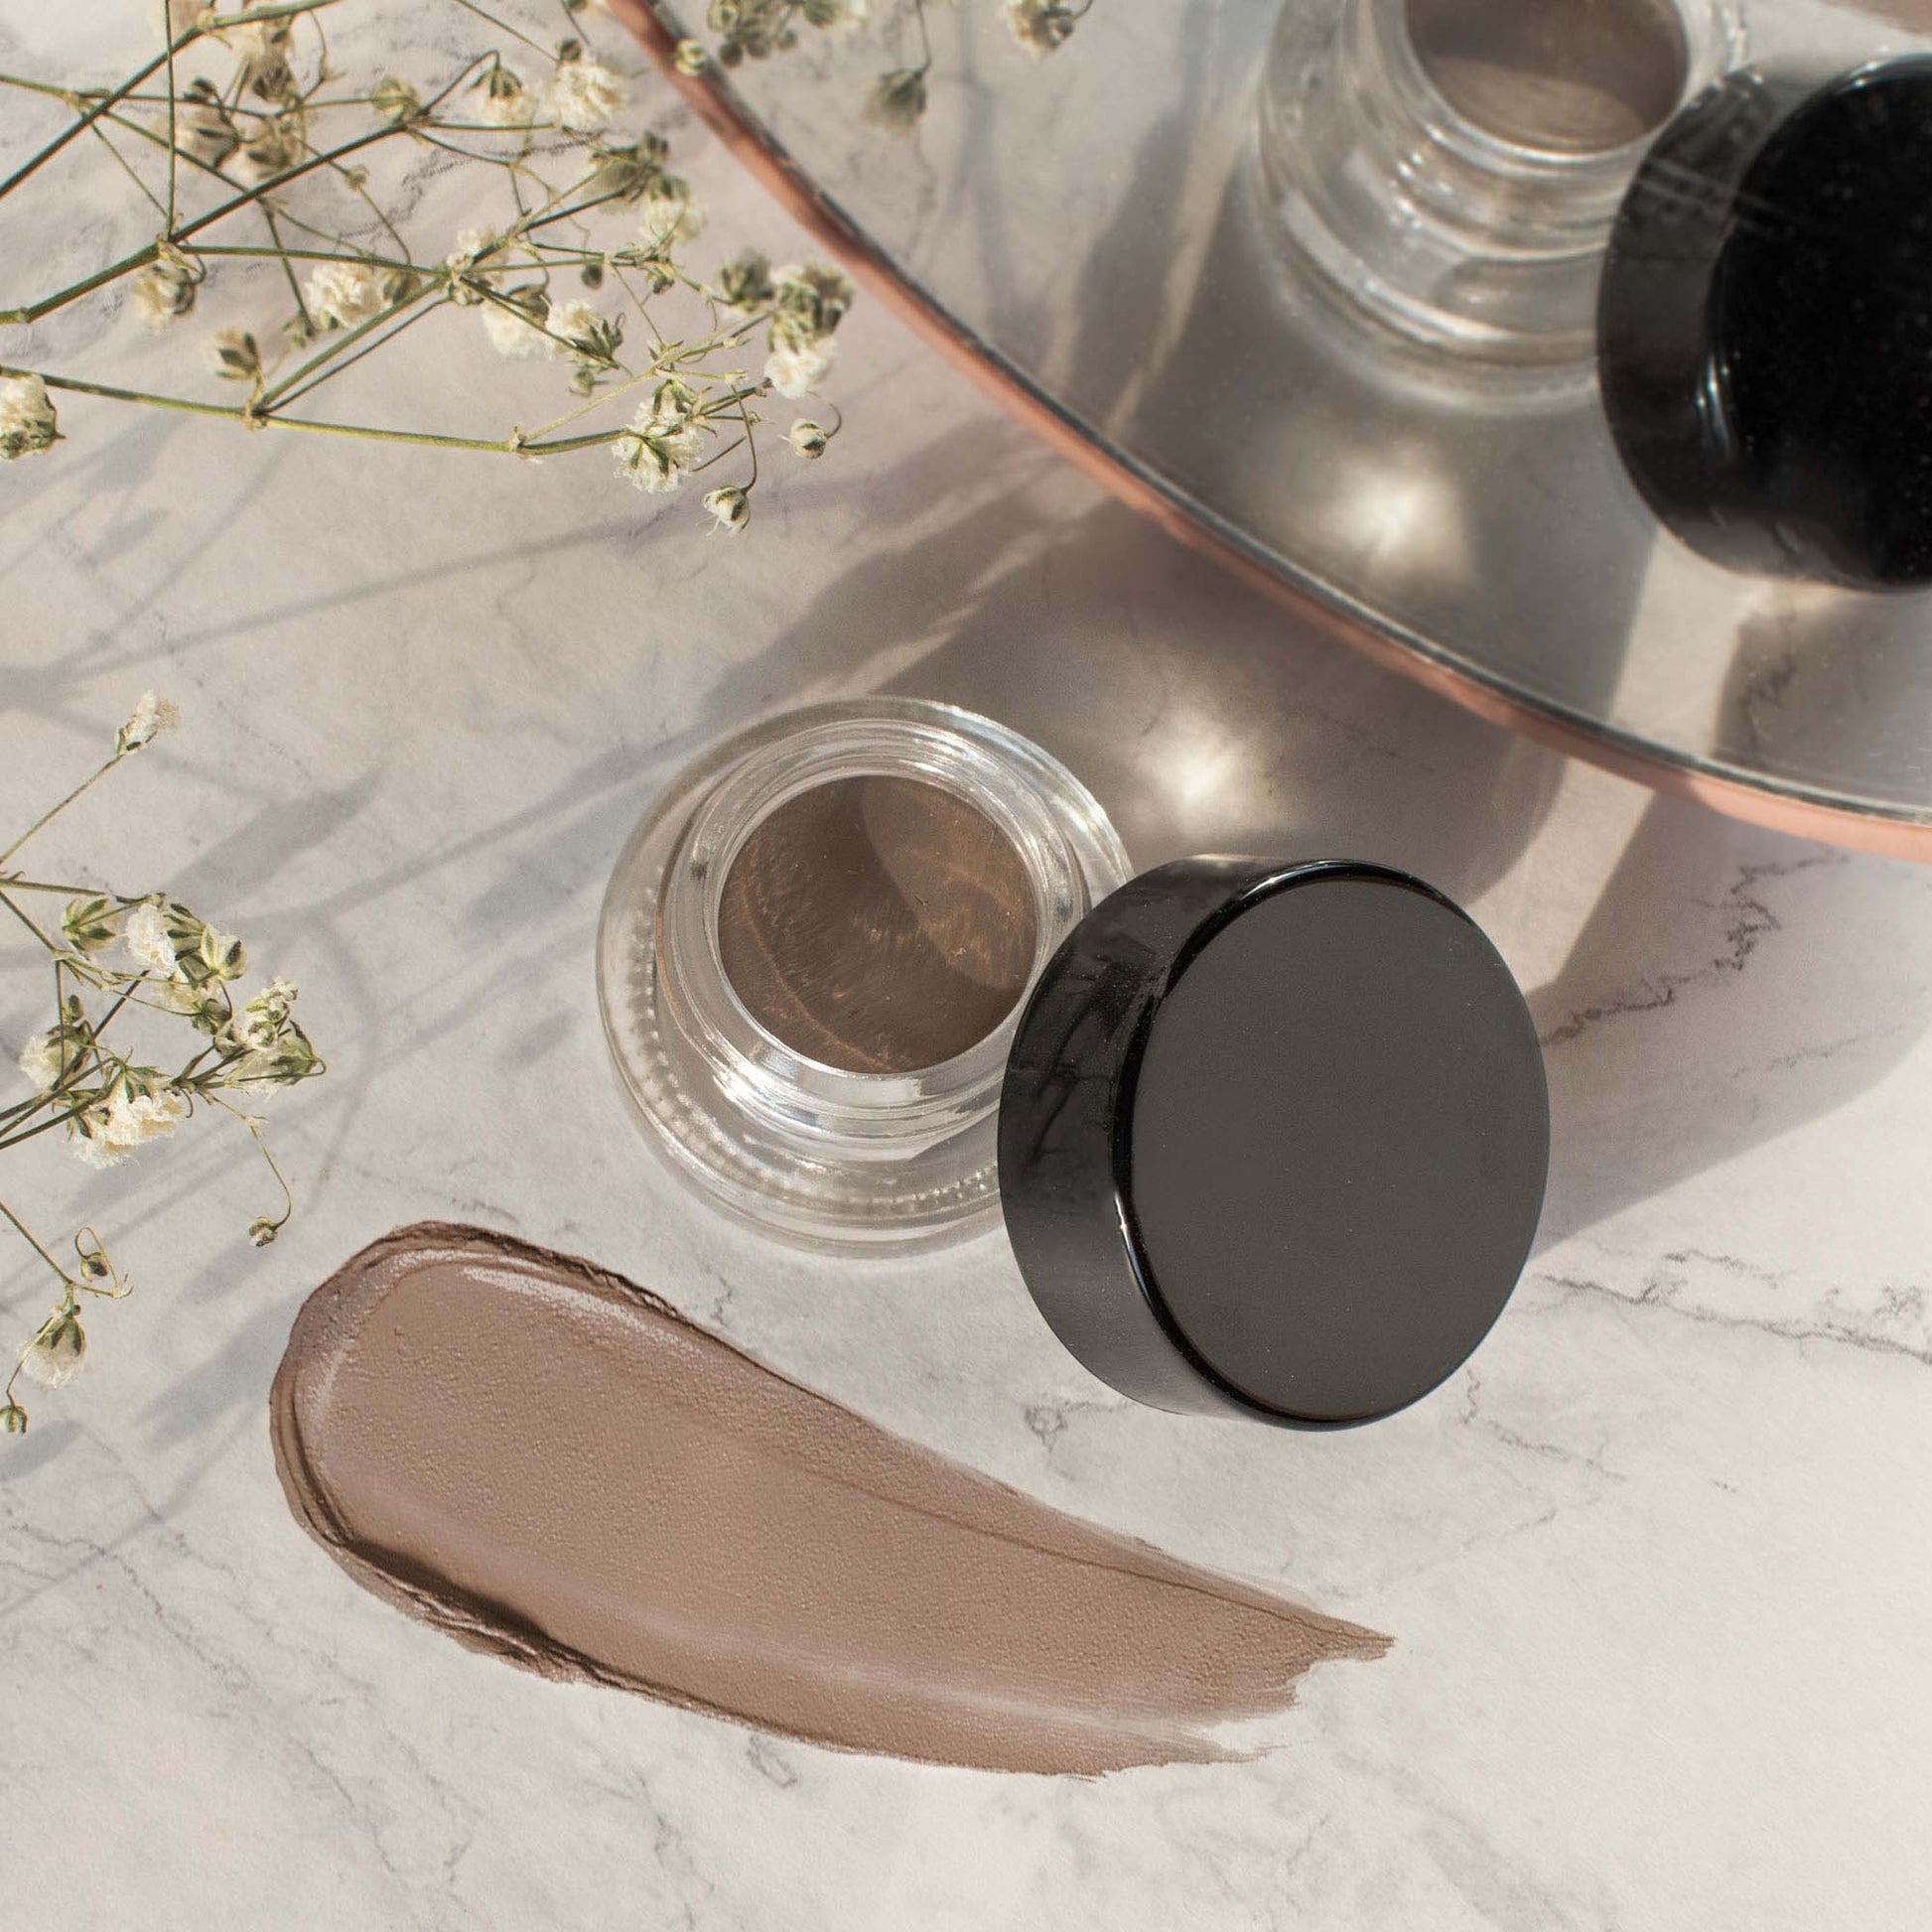 Maximize brows with Cruisin Organics Truffle Brow Pomade. Use our expert formula with titanium dioxide and truffle extract for defined, lasting results. Strengthen and nourish brows for a fuller, natural appearance.